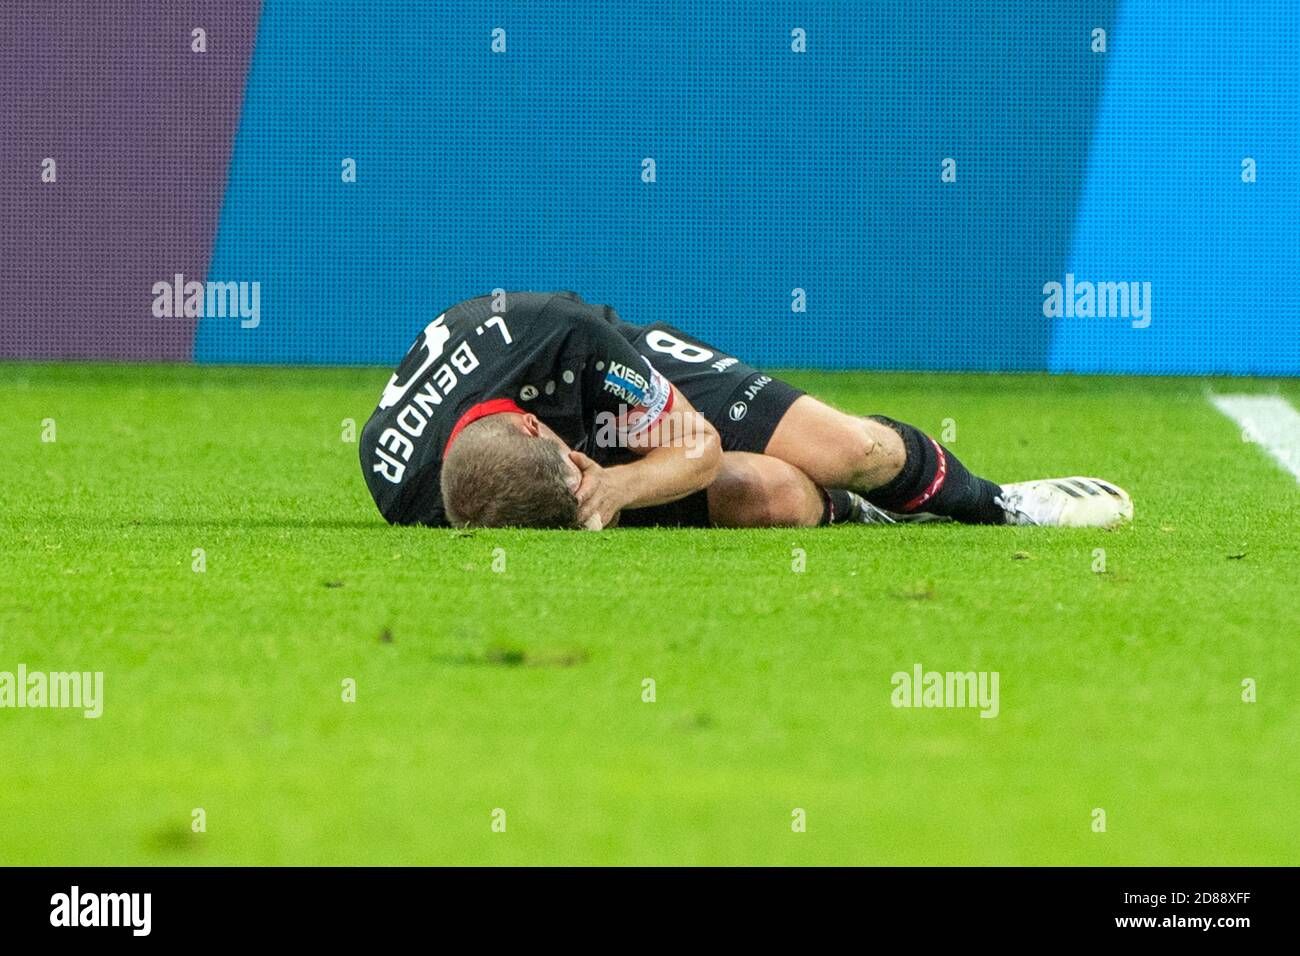 Lars BENDER (LEV) is injured on the pitch and has to be replaced, injury, lying, soccer 1st Bundesliga, 5th matchday, Bayer 04 Leverkusen (LEV) - FC Augsburg (A) 3: 1, on October 26th, 2020 in Leverkusen/Germany. ¬ | usage worldwide Stock Photo